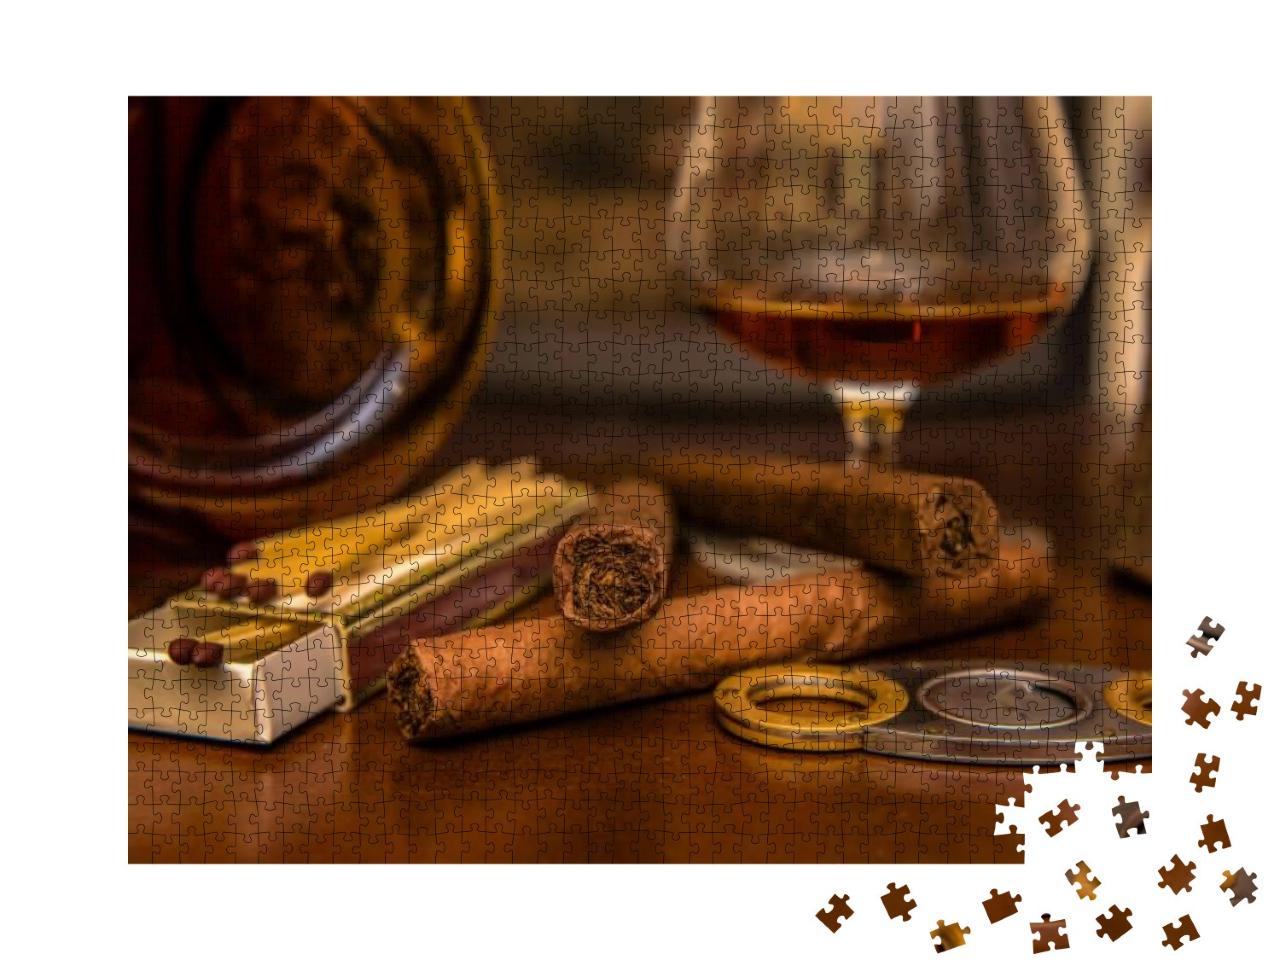 Time to Enjoy! Quality Cigars & Cognac on a Wooden Table... Jigsaw Puzzle with 1000 pieces